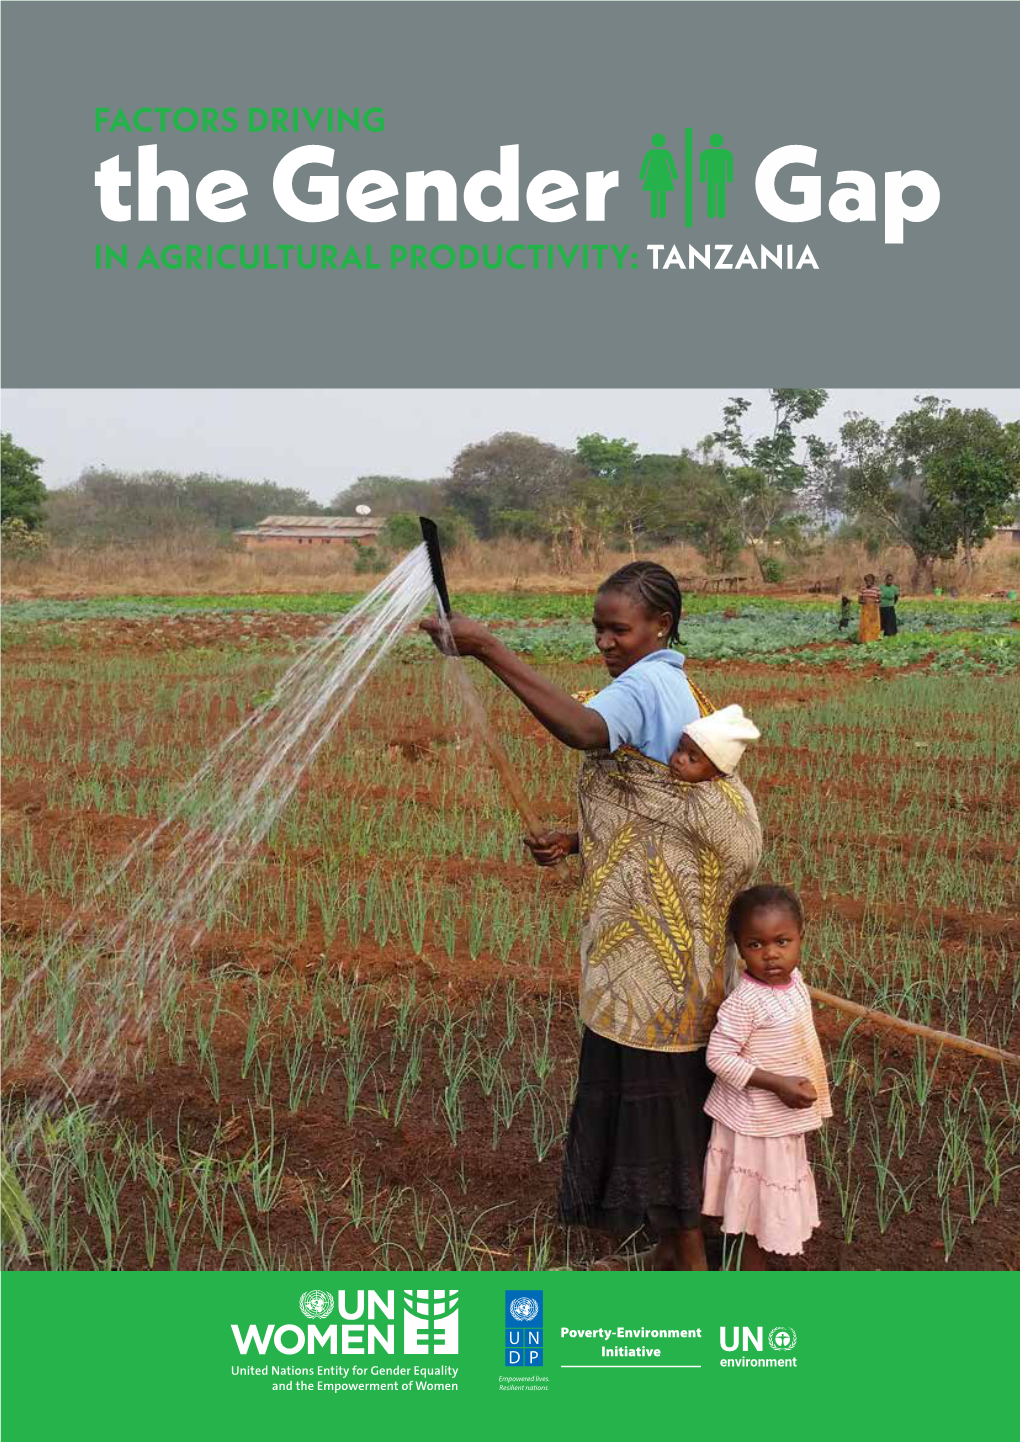 The Gender  Gap in AGRICULTURAL PRODUCTIVITY: TANZANIA